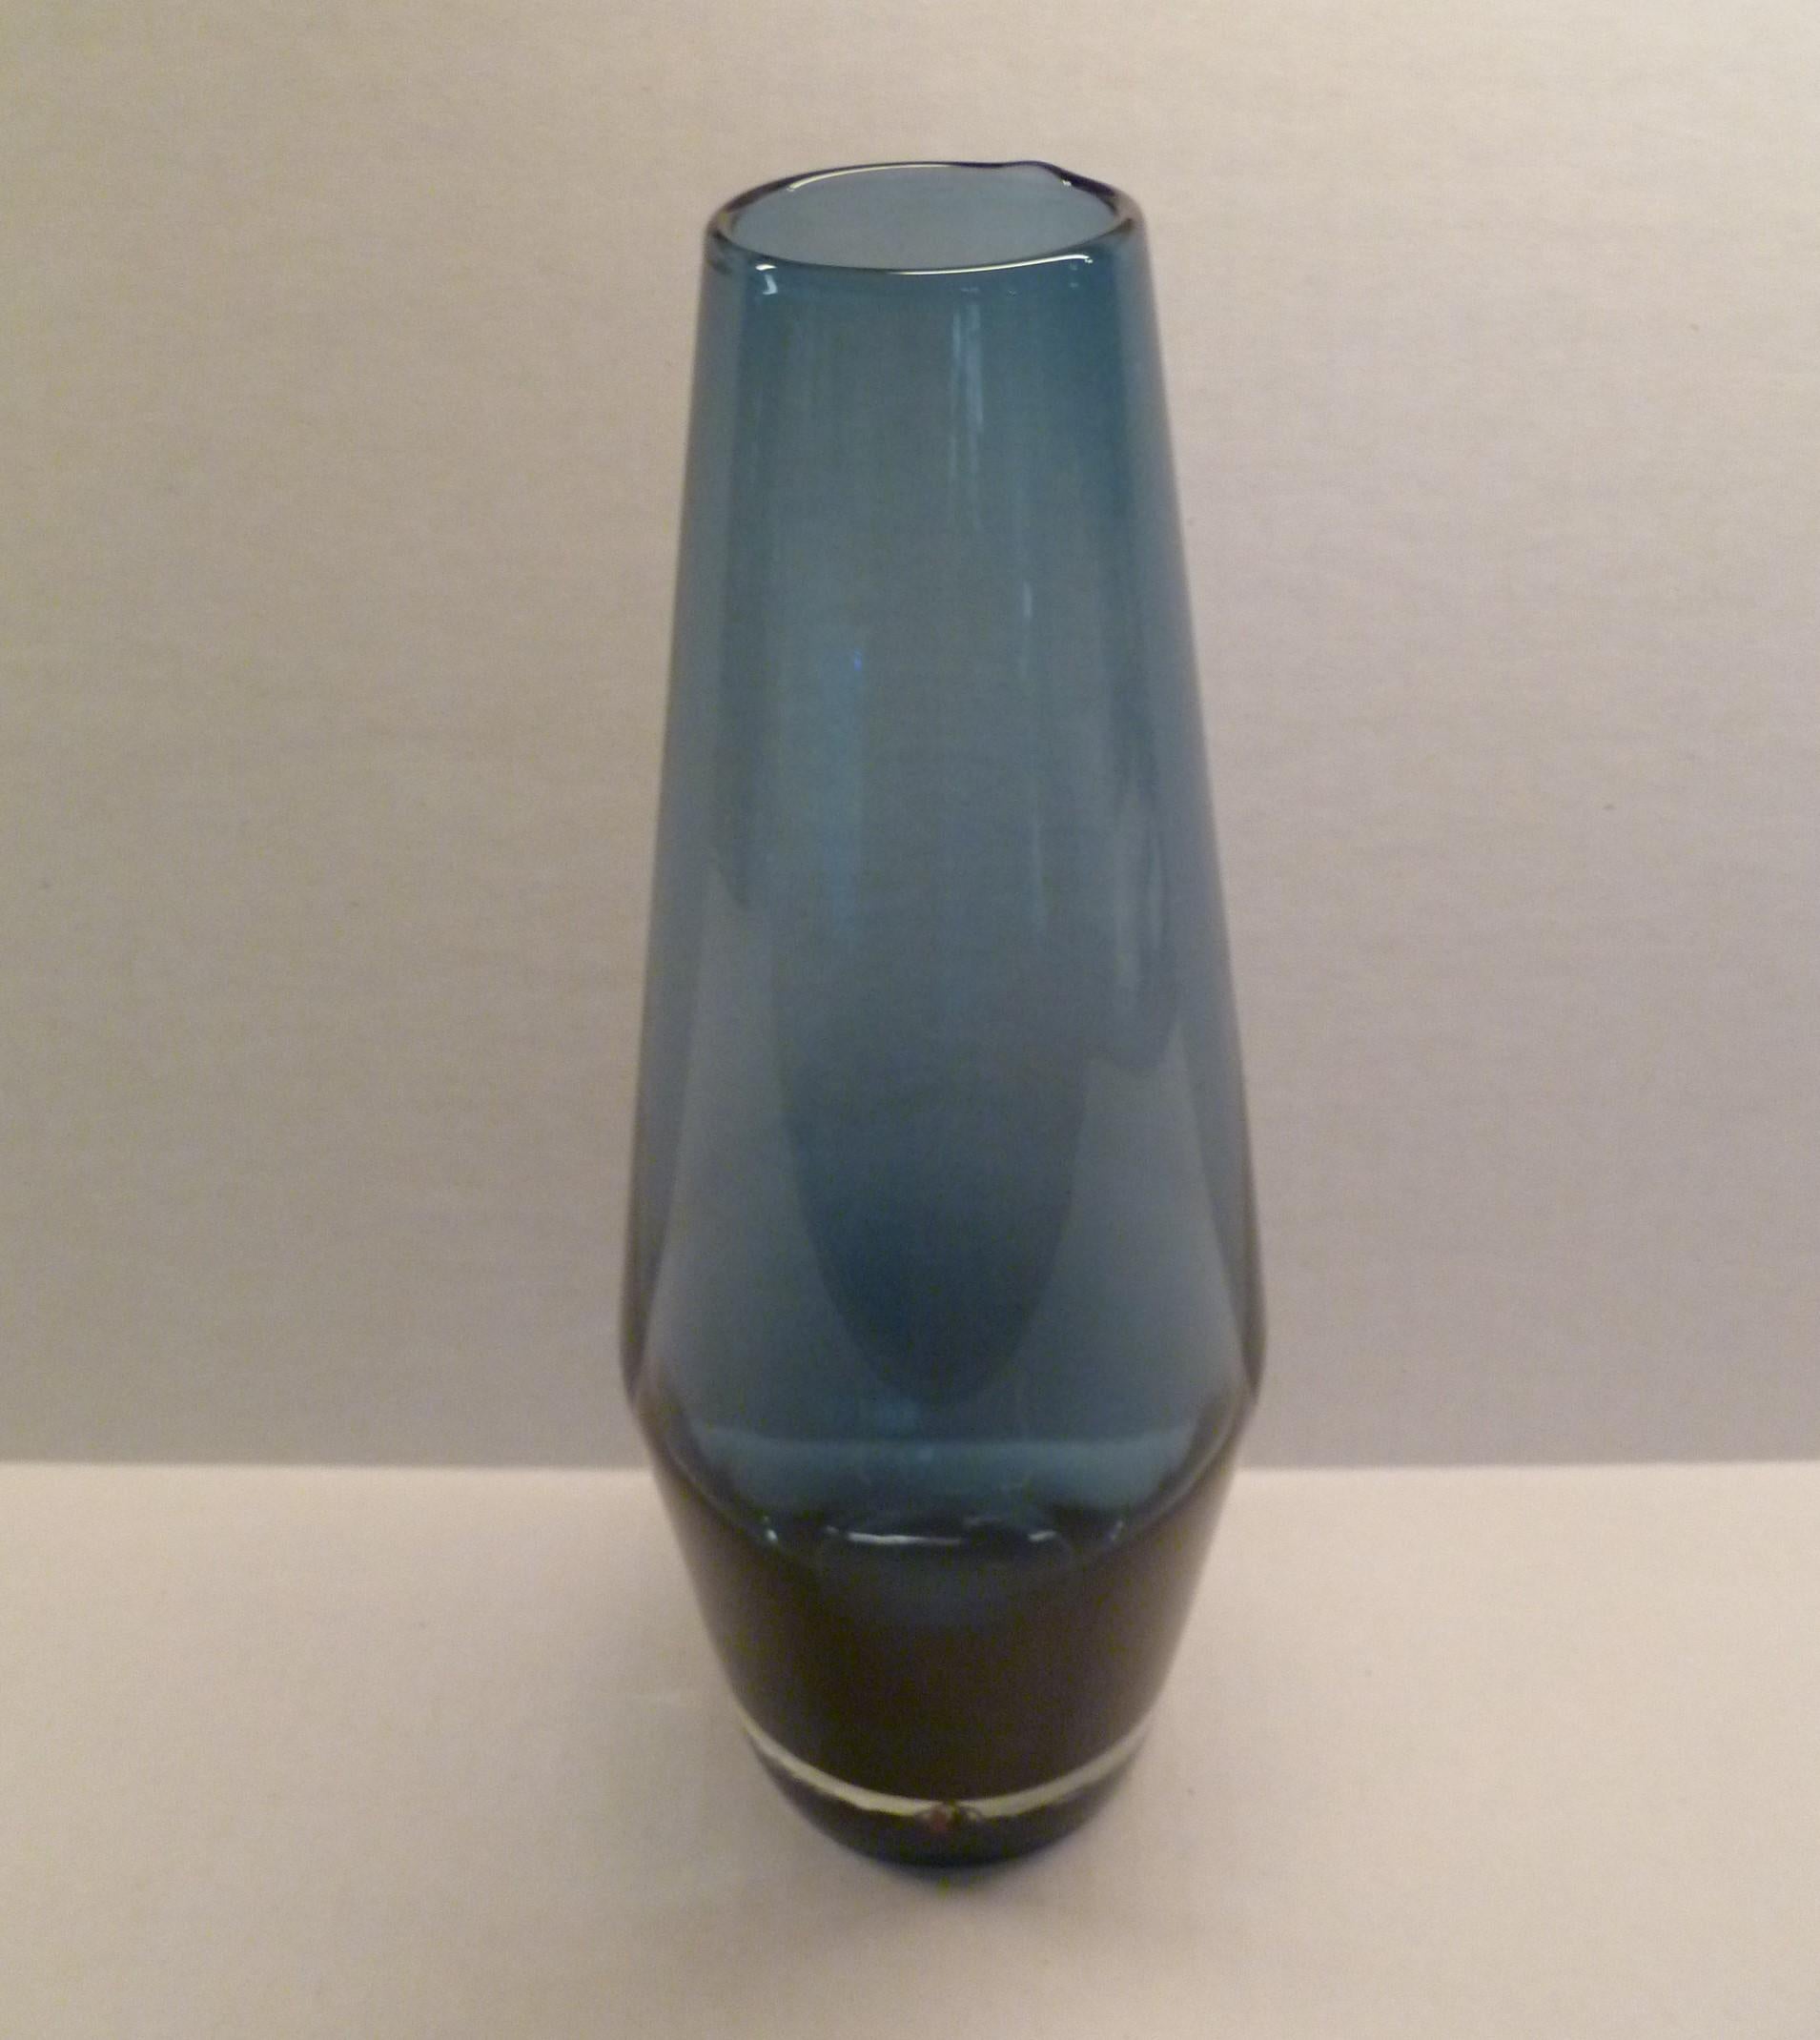 Another selection of a creation by Tamara Aladin, b.1932, for the Finnish glass factory Riihmäki / Riihimäen Lasi Oy. This listing is for the blue-gray colored vase with clear thick base. The base has on its edge the clear triangular Lion Riihimaki